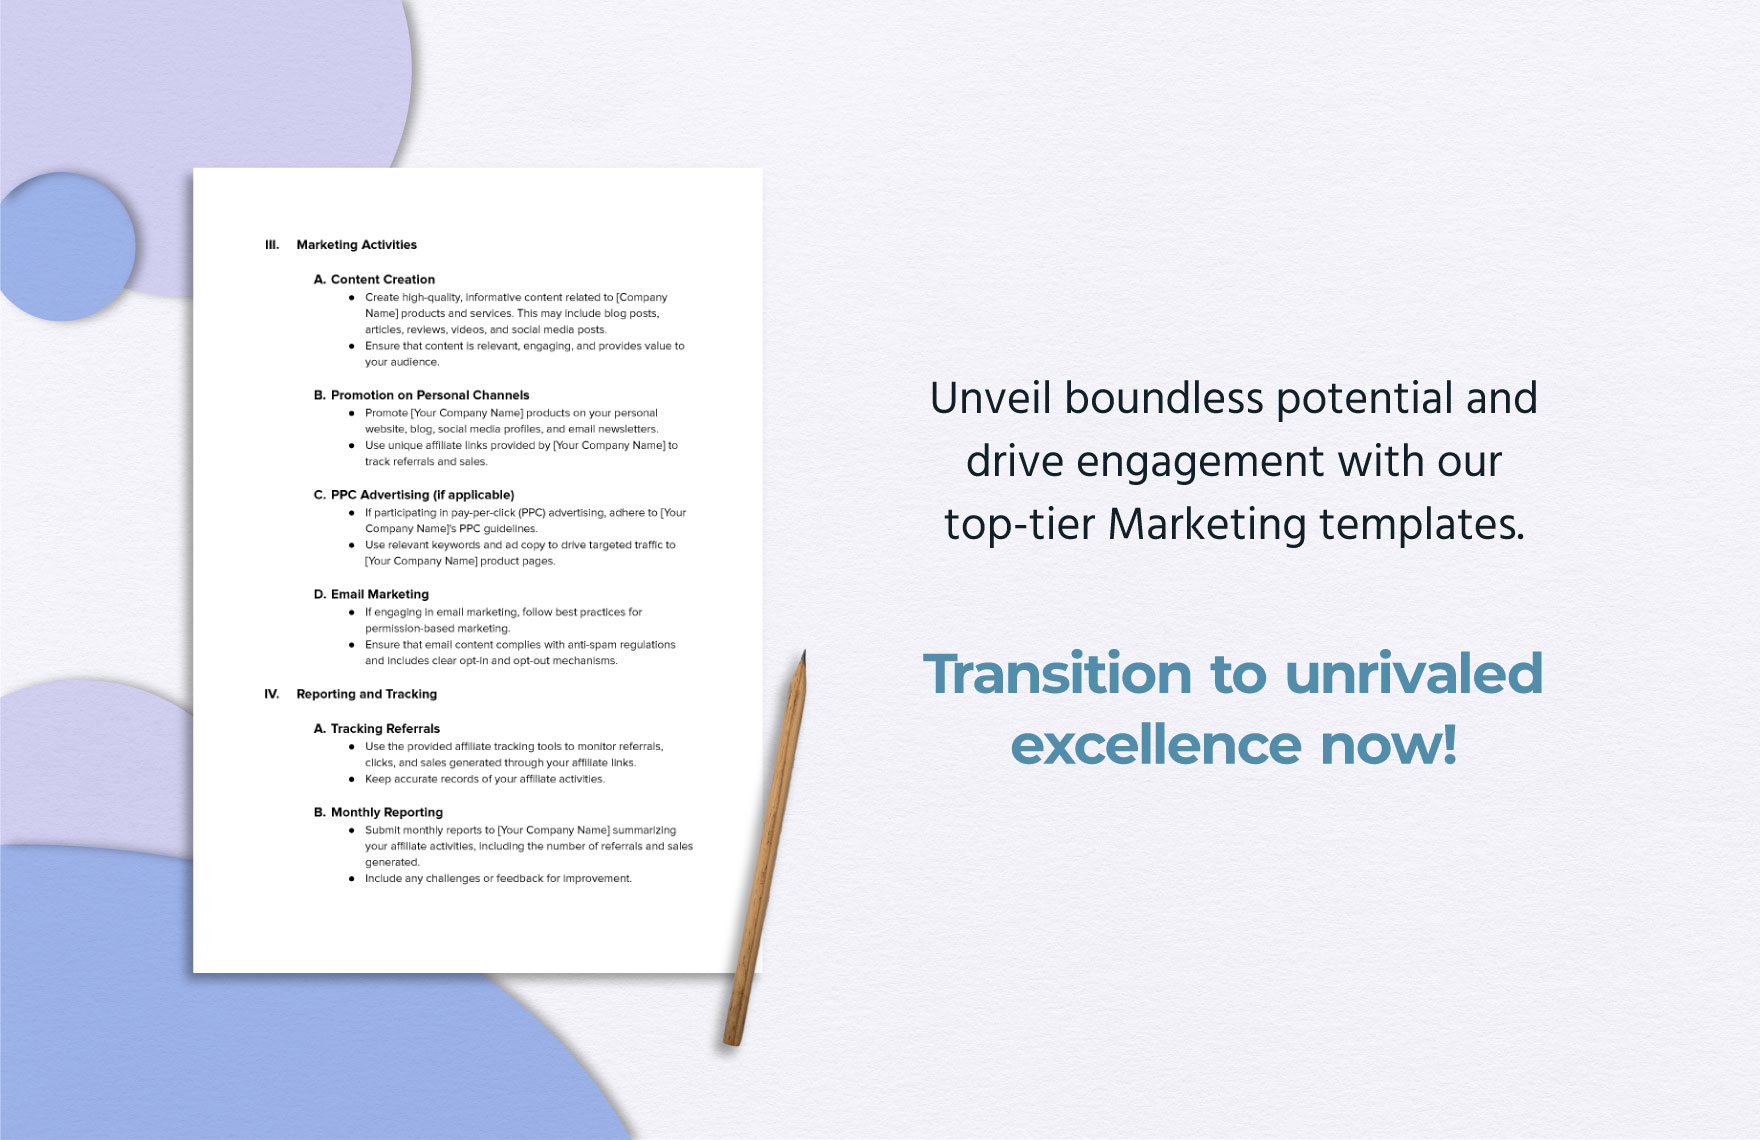 Marketing Affiliate Roles & Responsibilities Outline Template